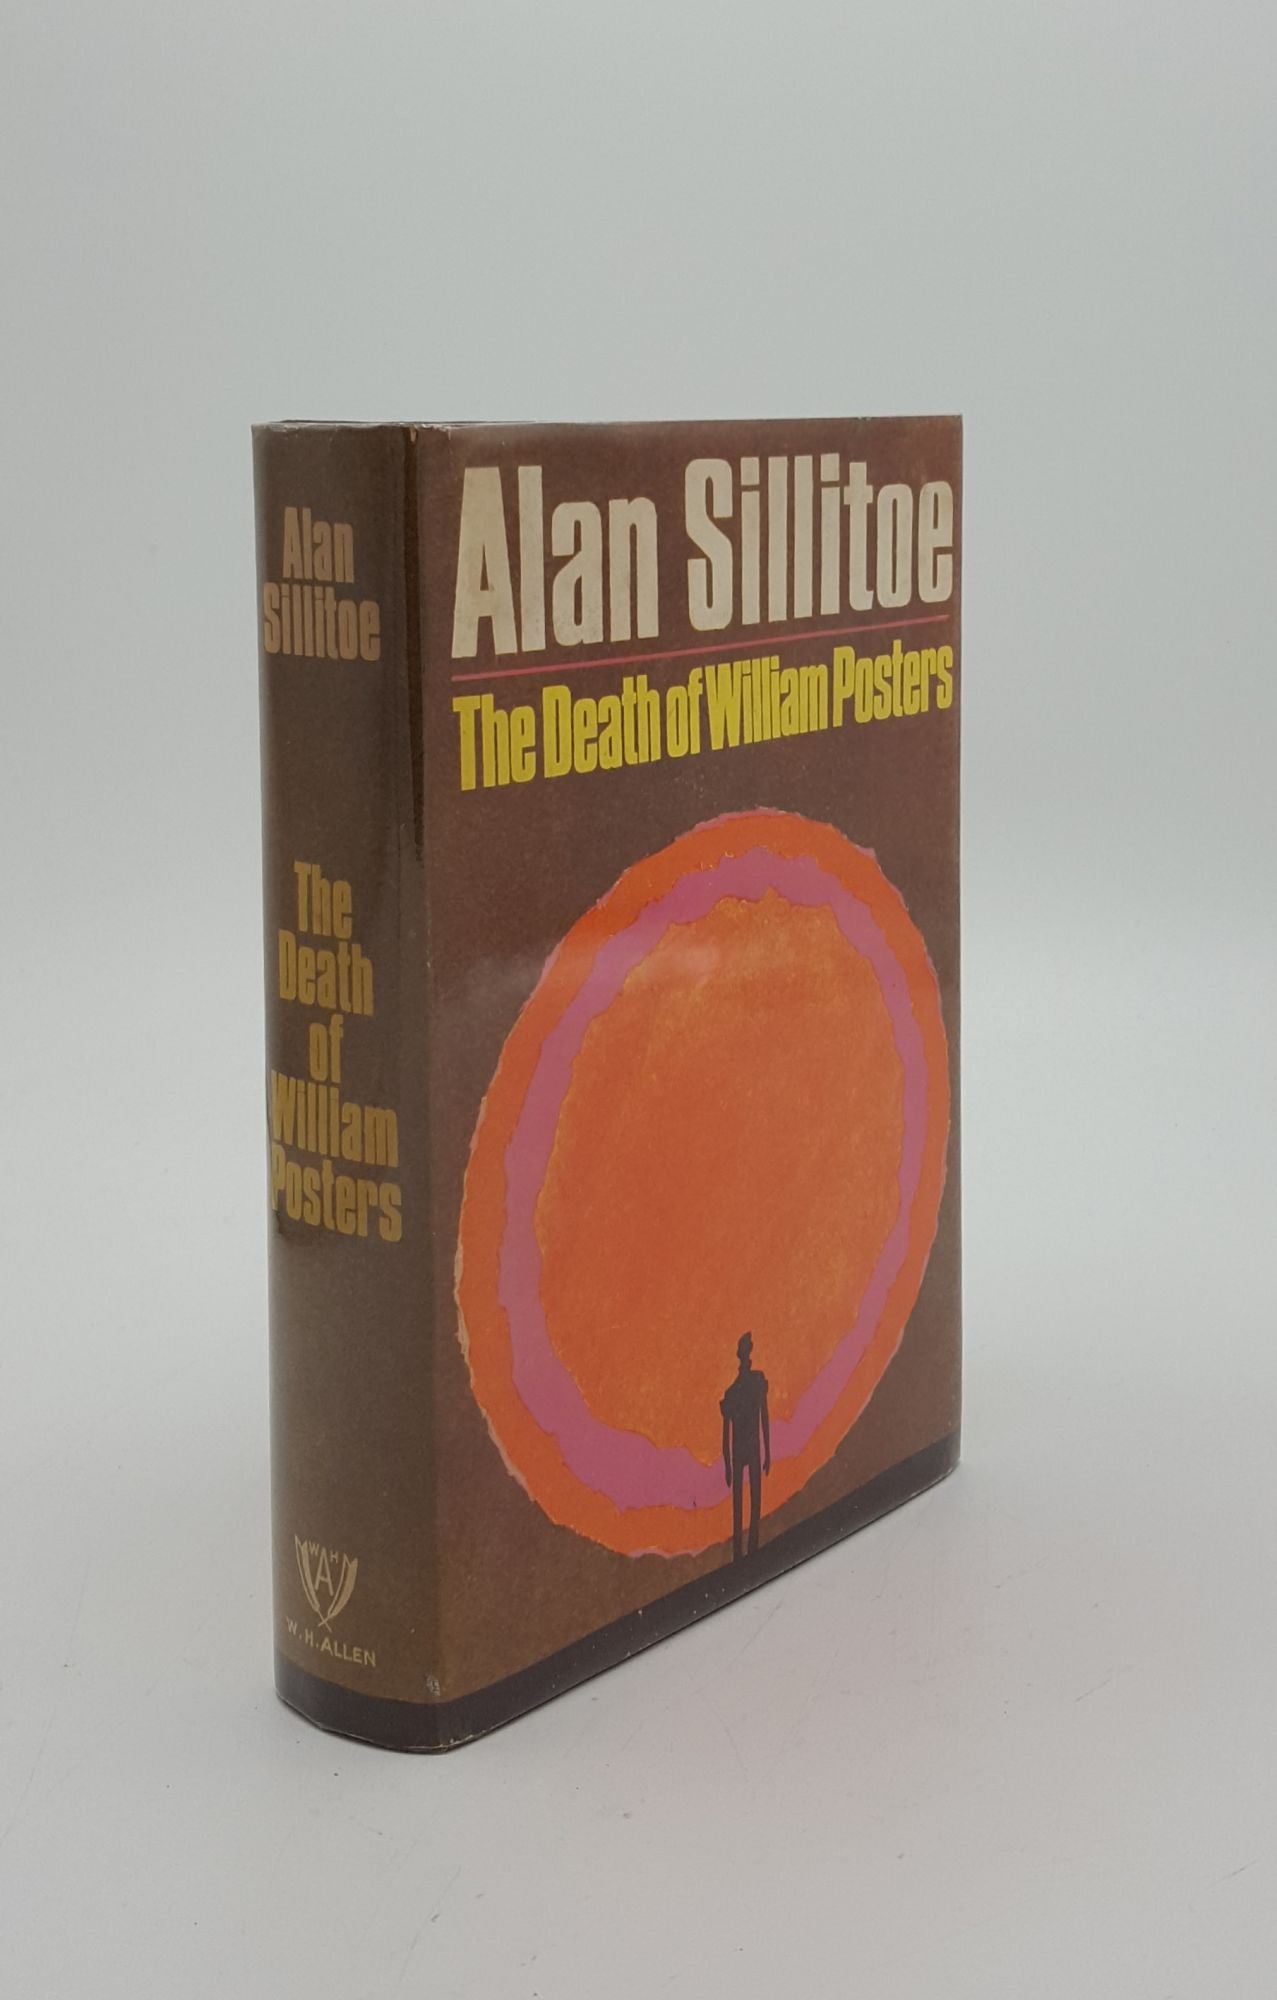 SILLITOE Alan - The Death of William Posters